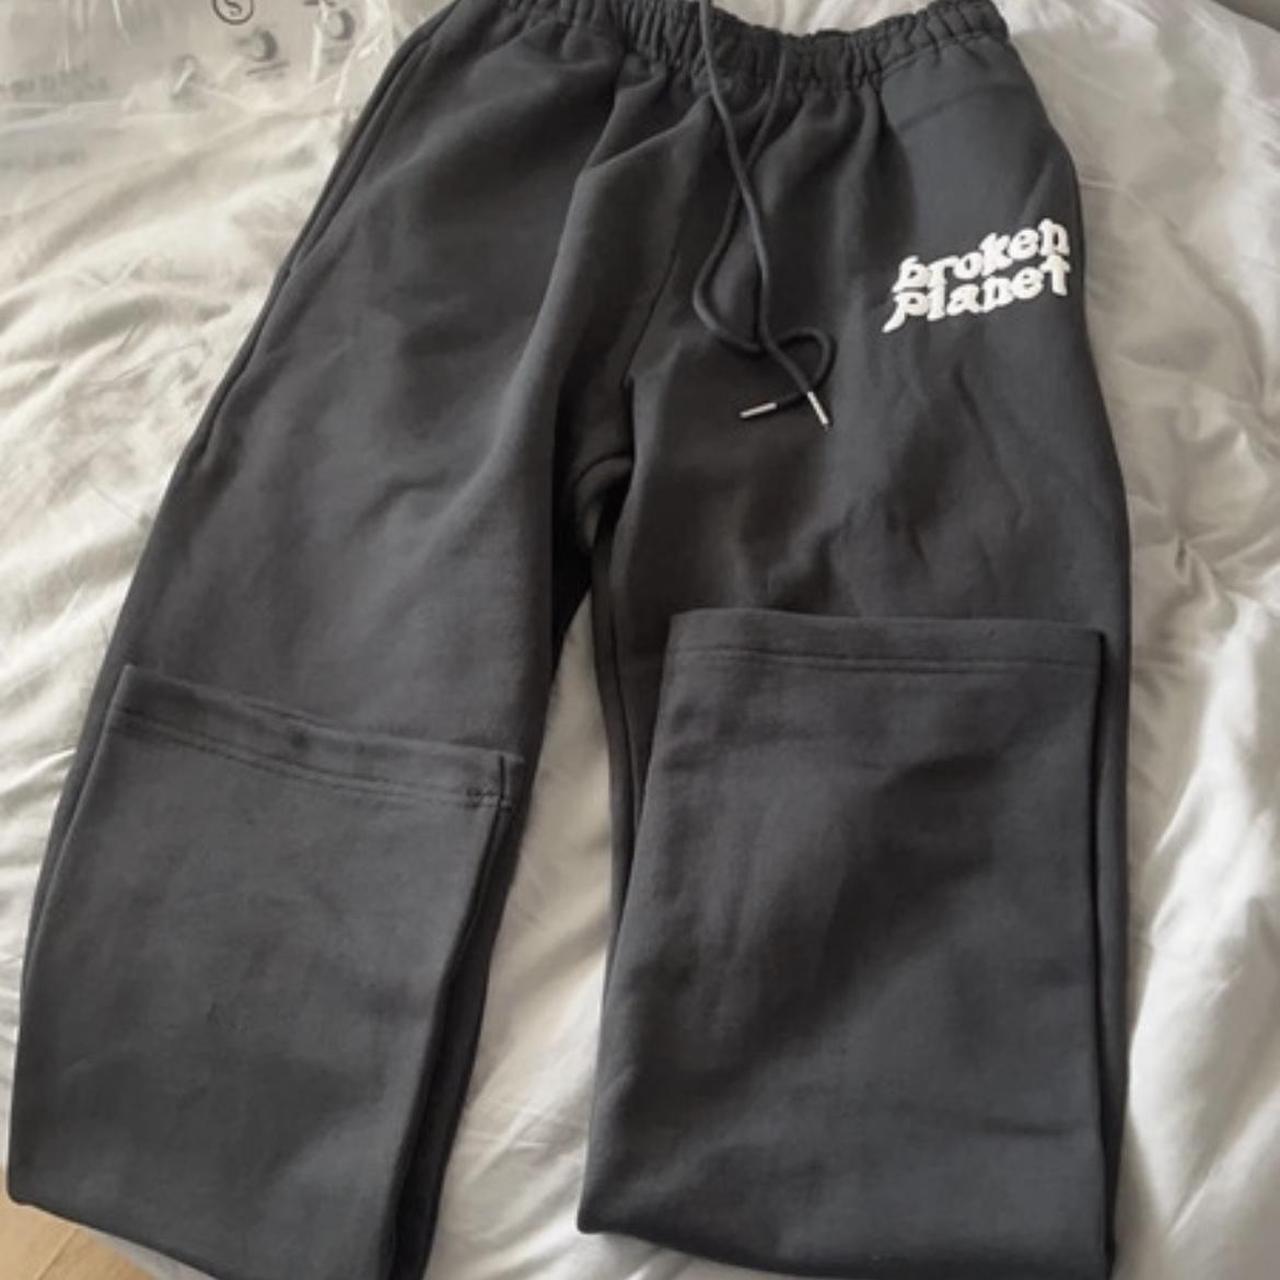 Broken planet joggers Size S Worn only once No... - Depop